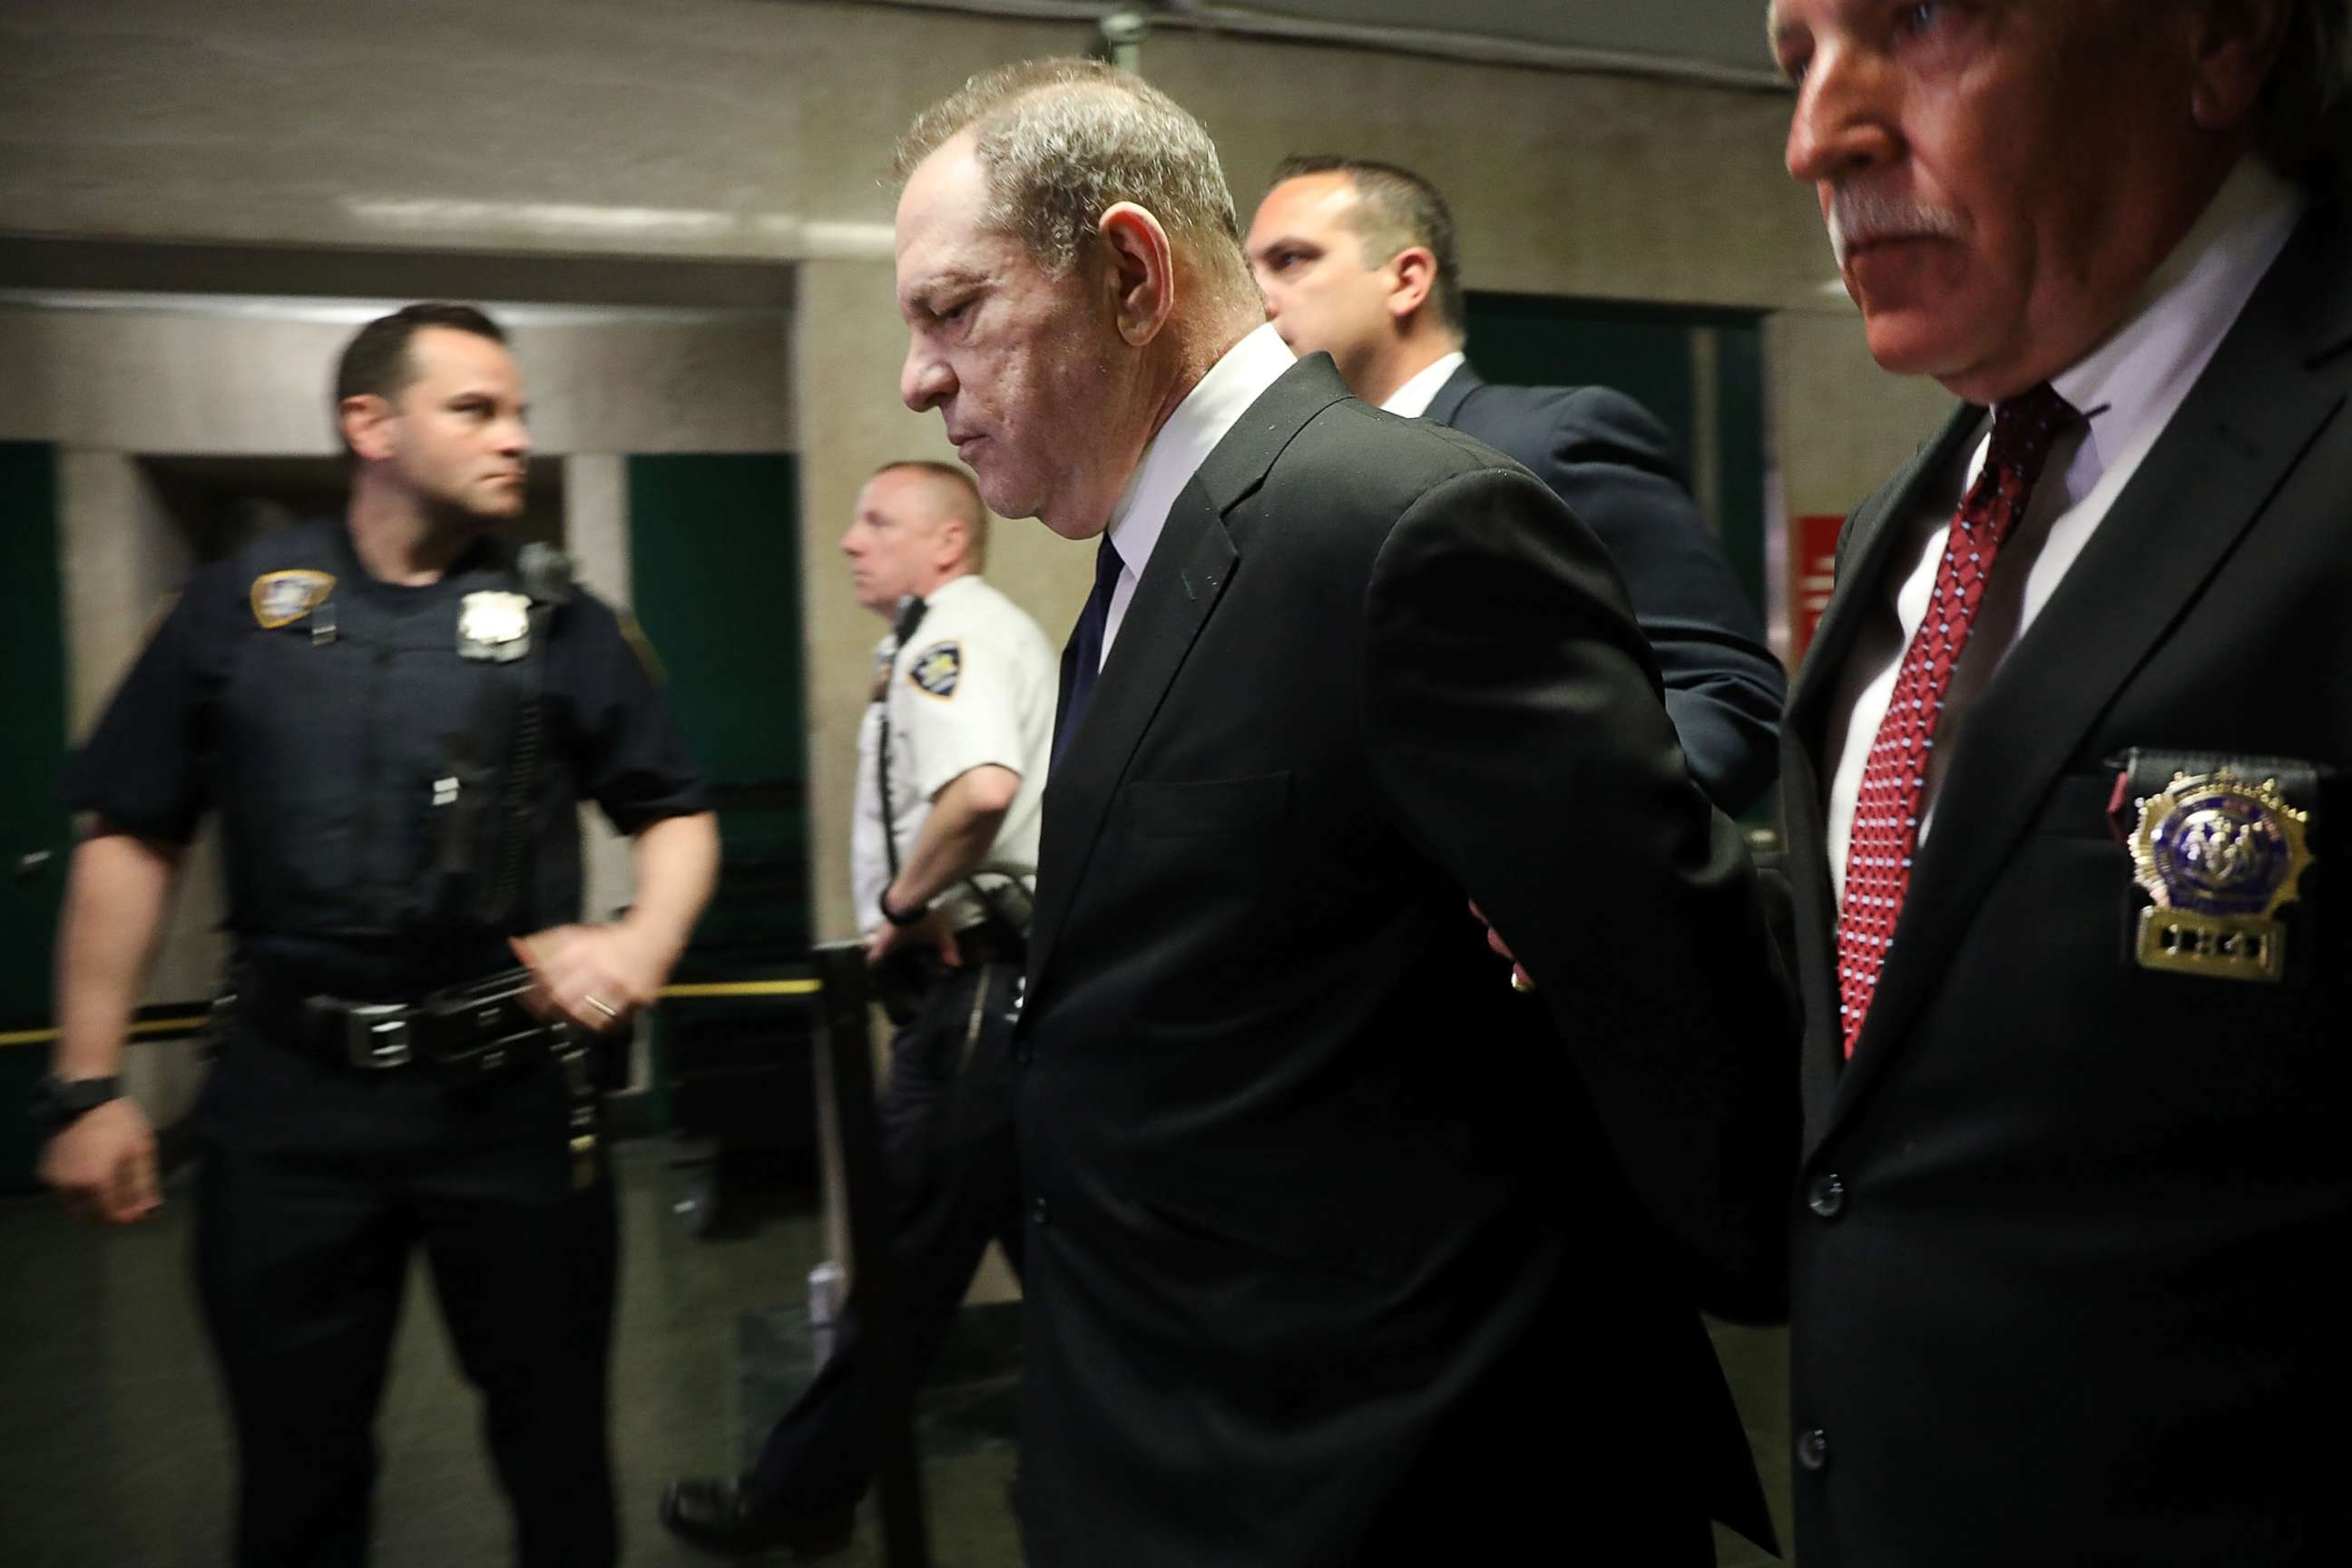 PHOTO: Harvey Weinstein is escorted in handcuffs into State Supreme Court for an arraignment July 9, 2018 in New York.